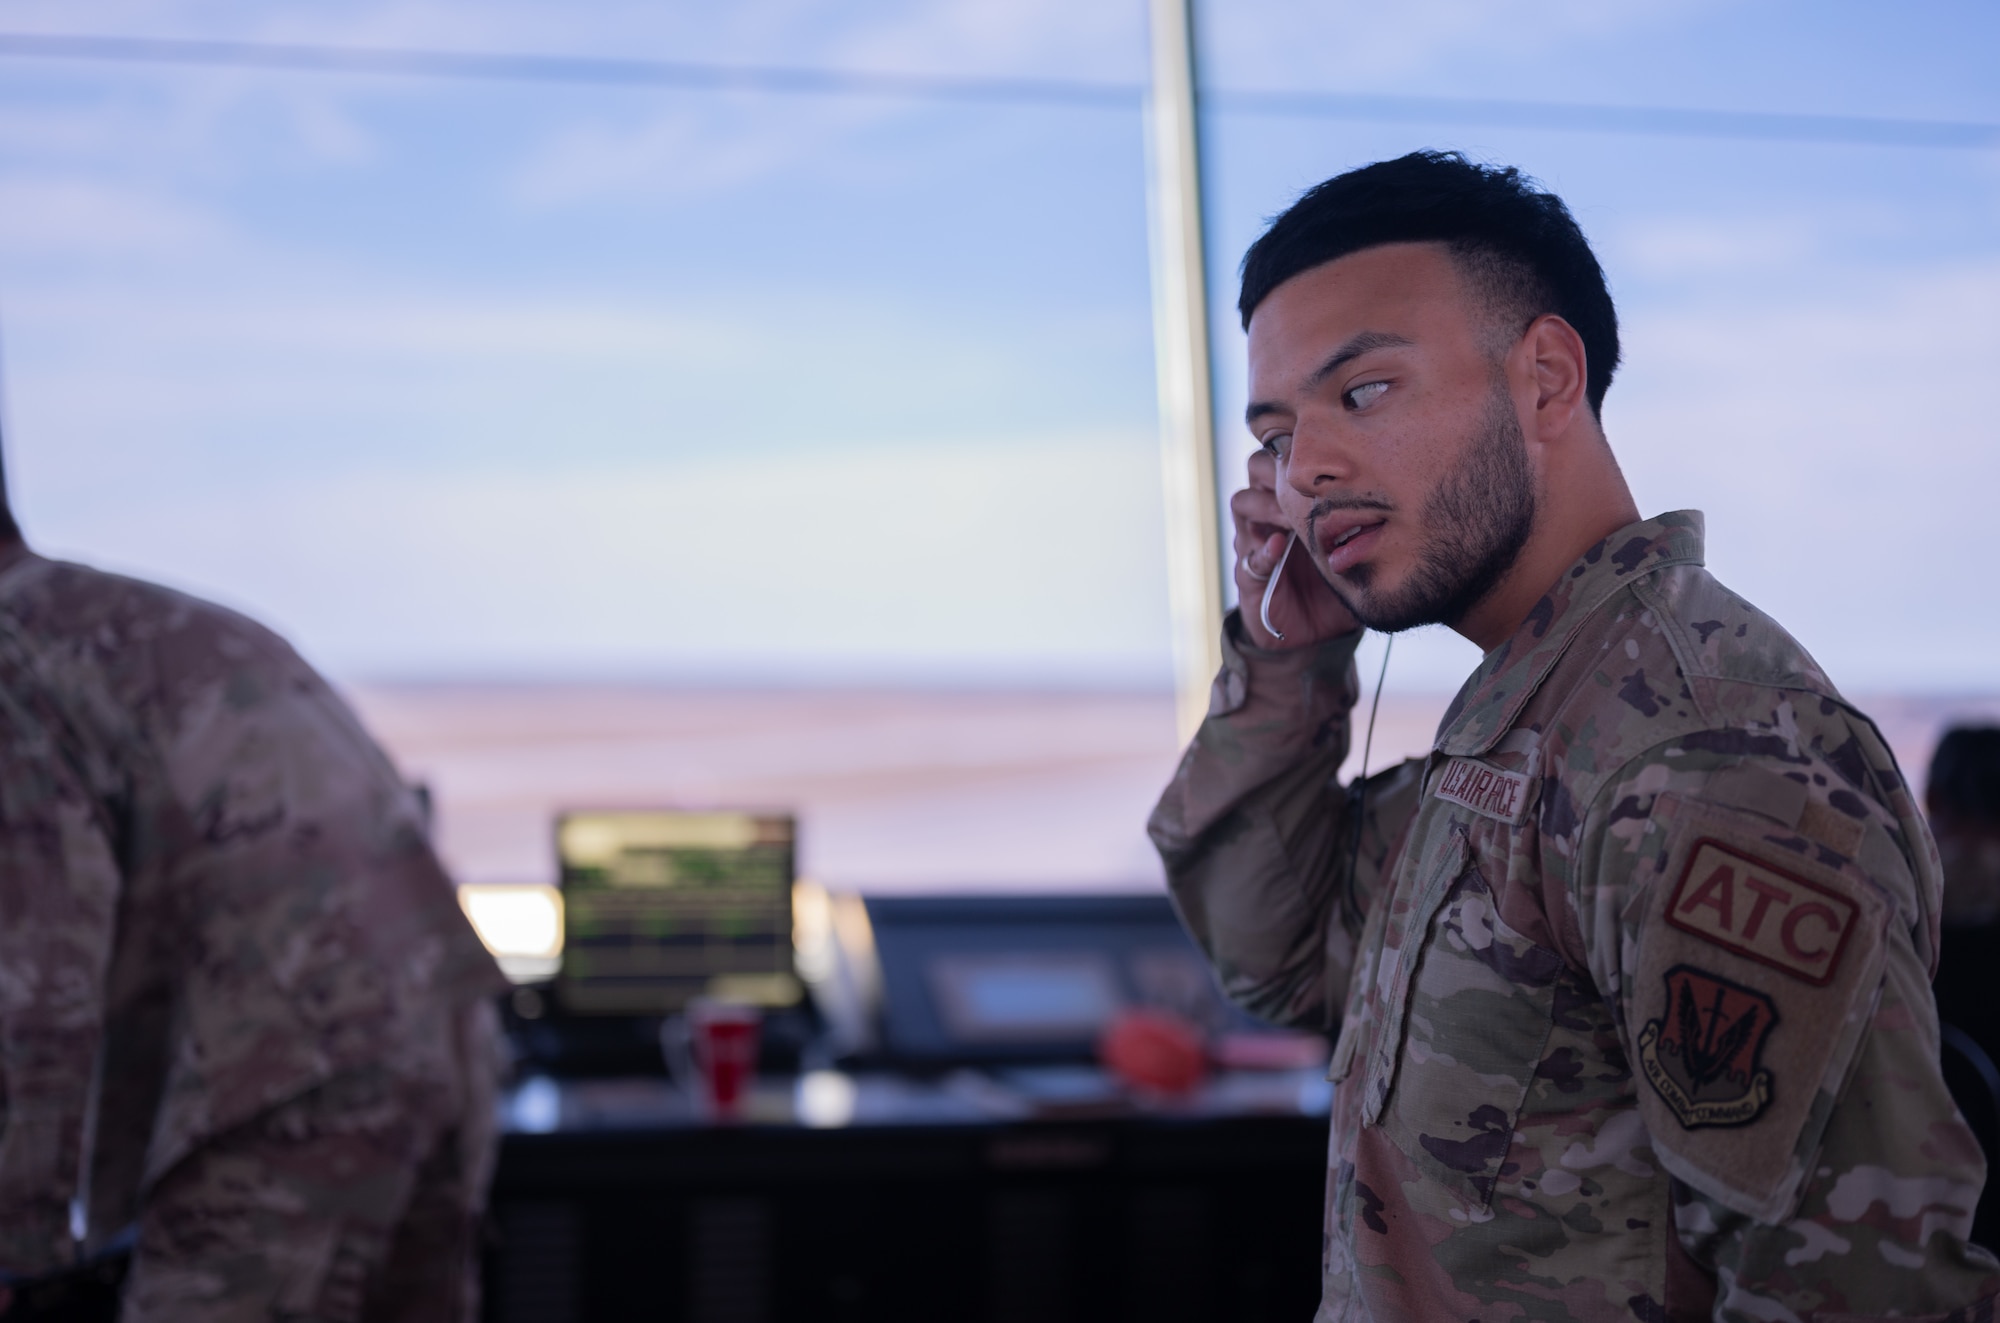 An Airman adjusts his headset in the air traffic control tower at Tyndall Air Force Base.